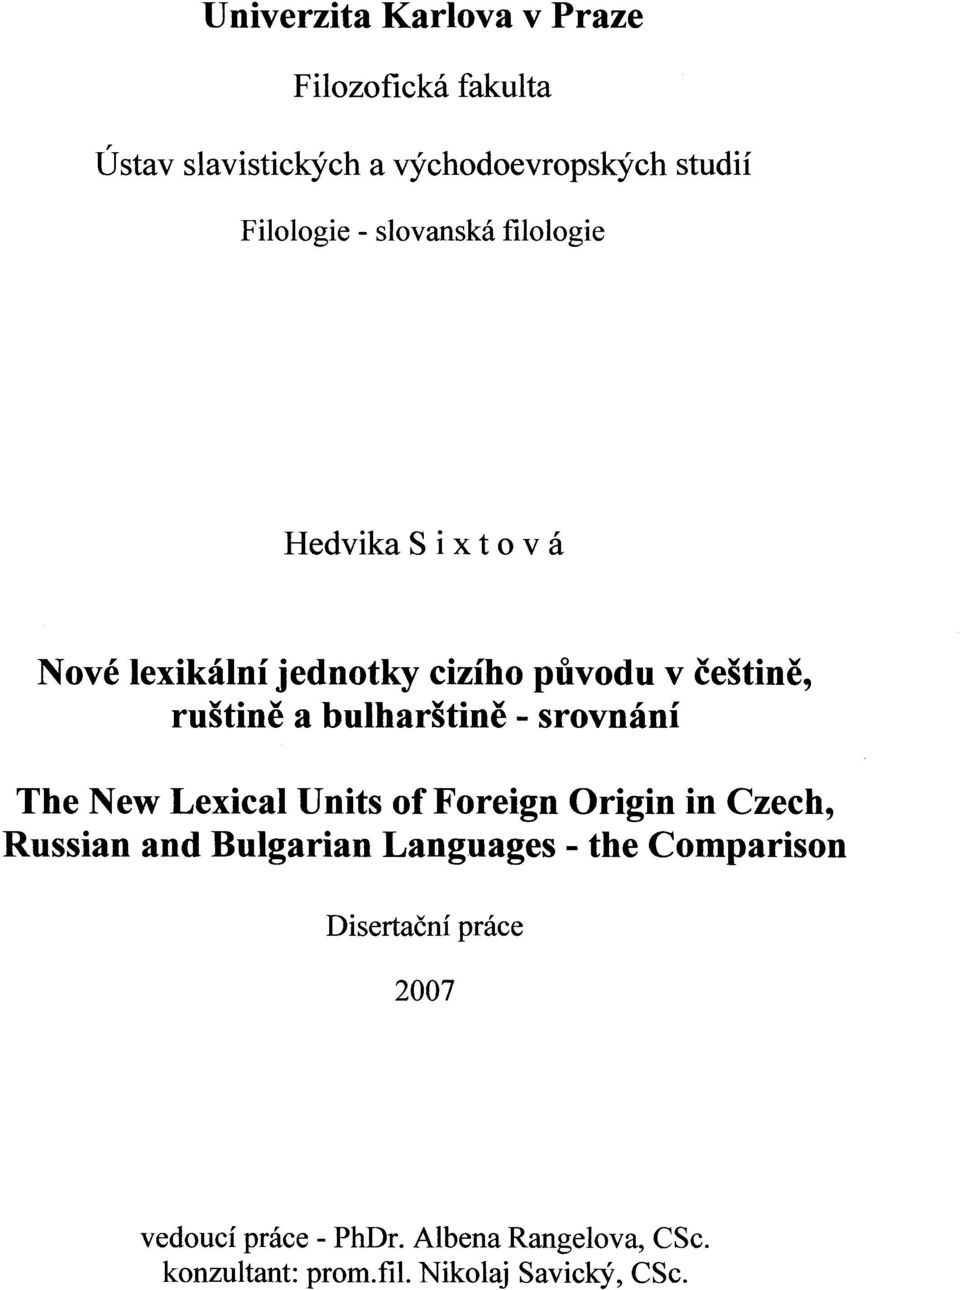 bulharštině - srovnání The New Lexical Units offoreign Origin in Czech, Russian and Bulgarian Languages - the